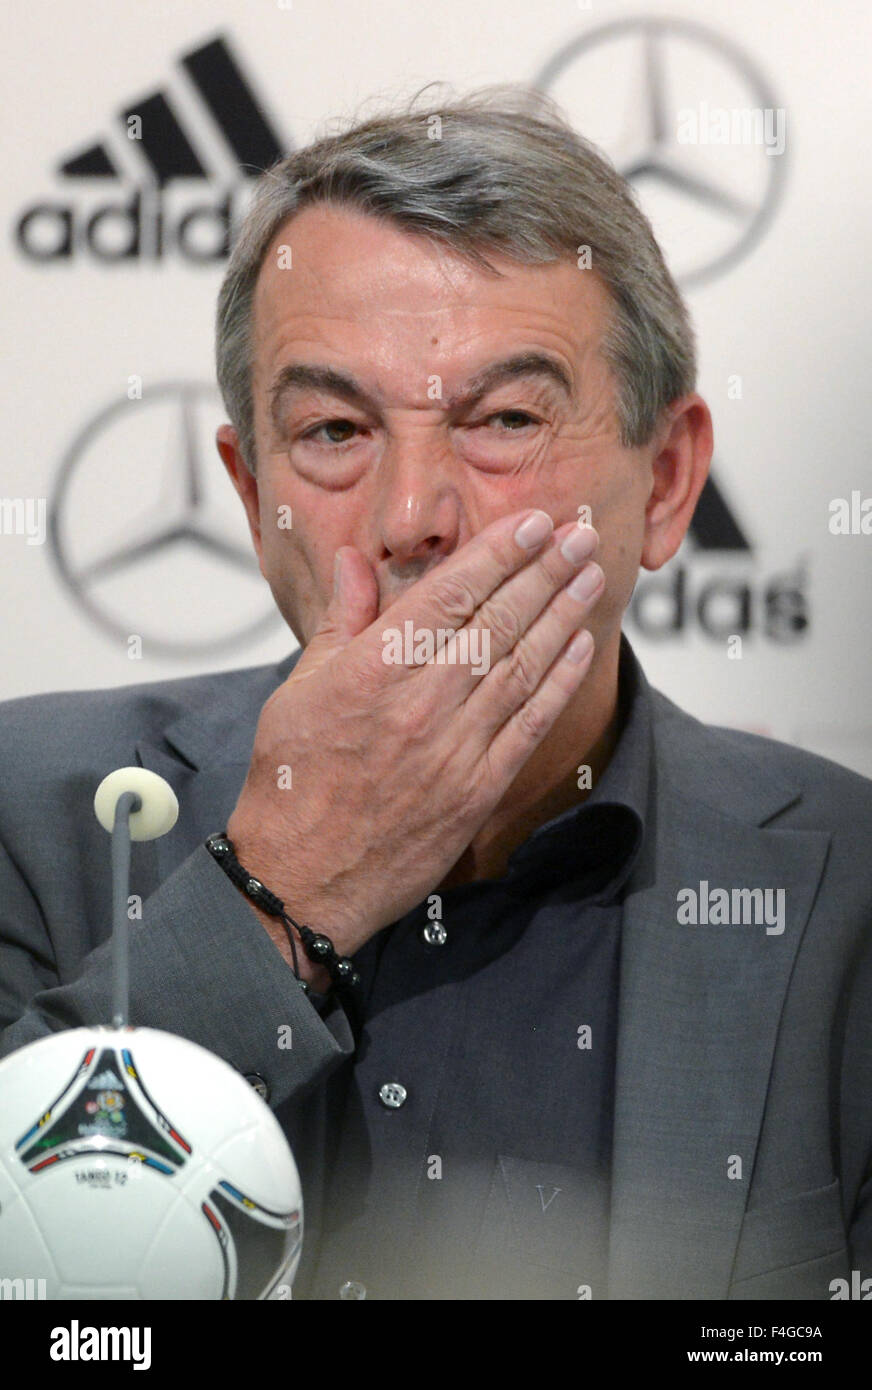 Gdansk, Poland. 5th June, 2012. President of DFB, Wolfgang Niersbach, reacts during a press conference of the German national soccer team at hotel Dwor Oliwski in Gdansk, Poland, 5 June 2012. The UEFA EURO 2012 will take place from 08 June to 01 July 2012 and is co hosted by Poland and Ukraine. Photo: Marcus Brandt dpa /dpa/Alamy Live News Stock Photo